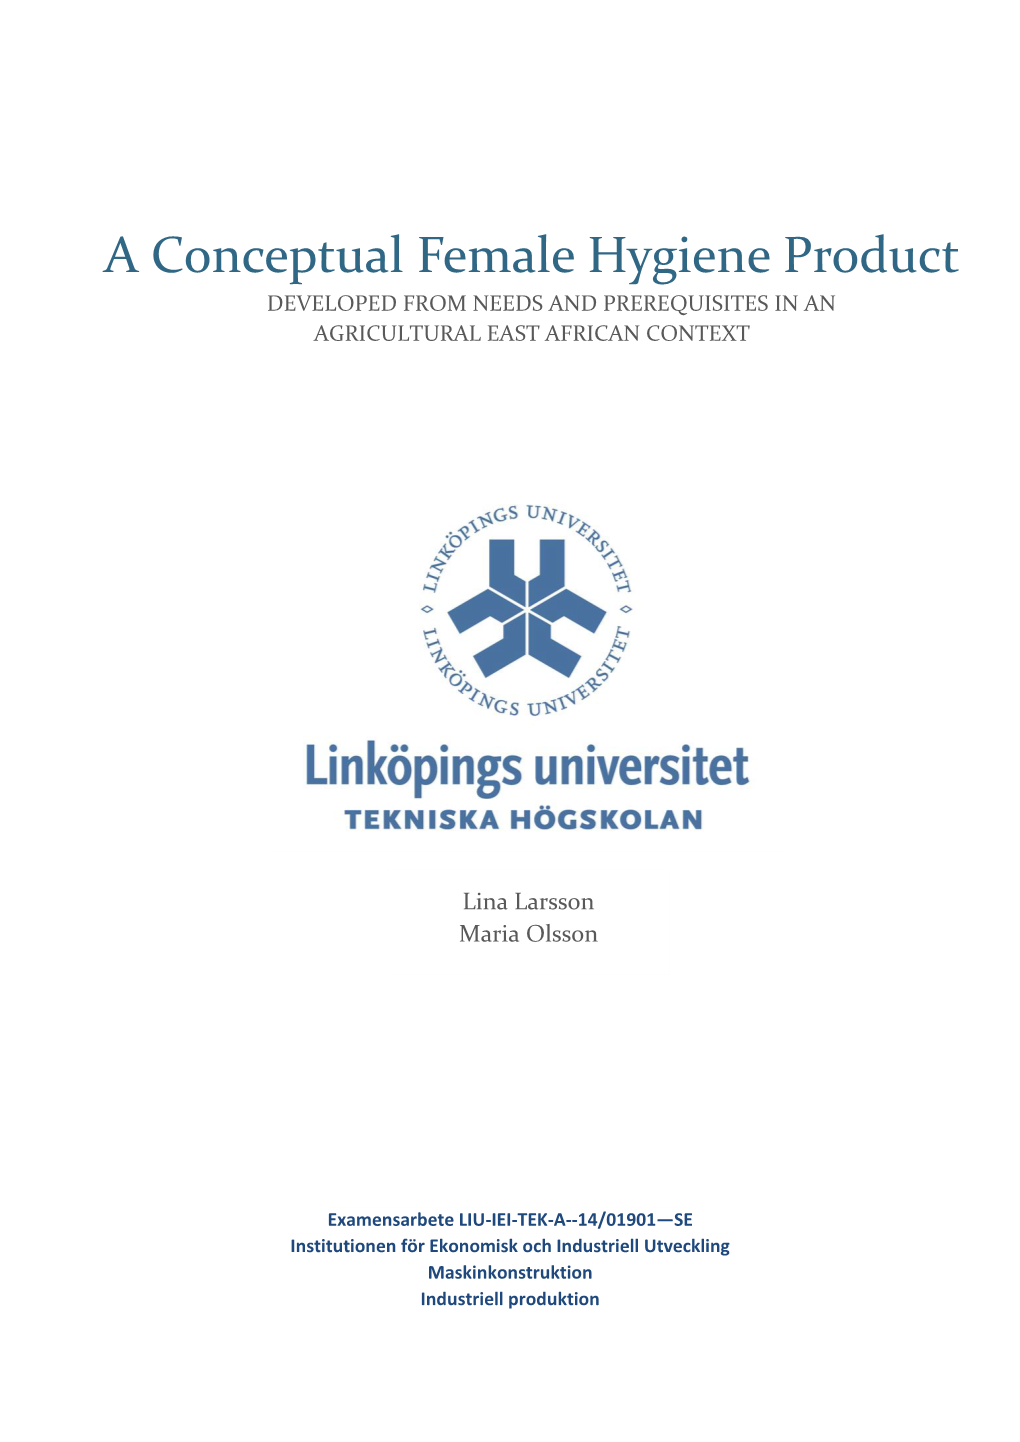 A Conceptual Female Hygiene Product DEVELOPED from NEEDS and PREREQUISITES in an AGRICULTURAL EAST AFRICAN CONTEXT